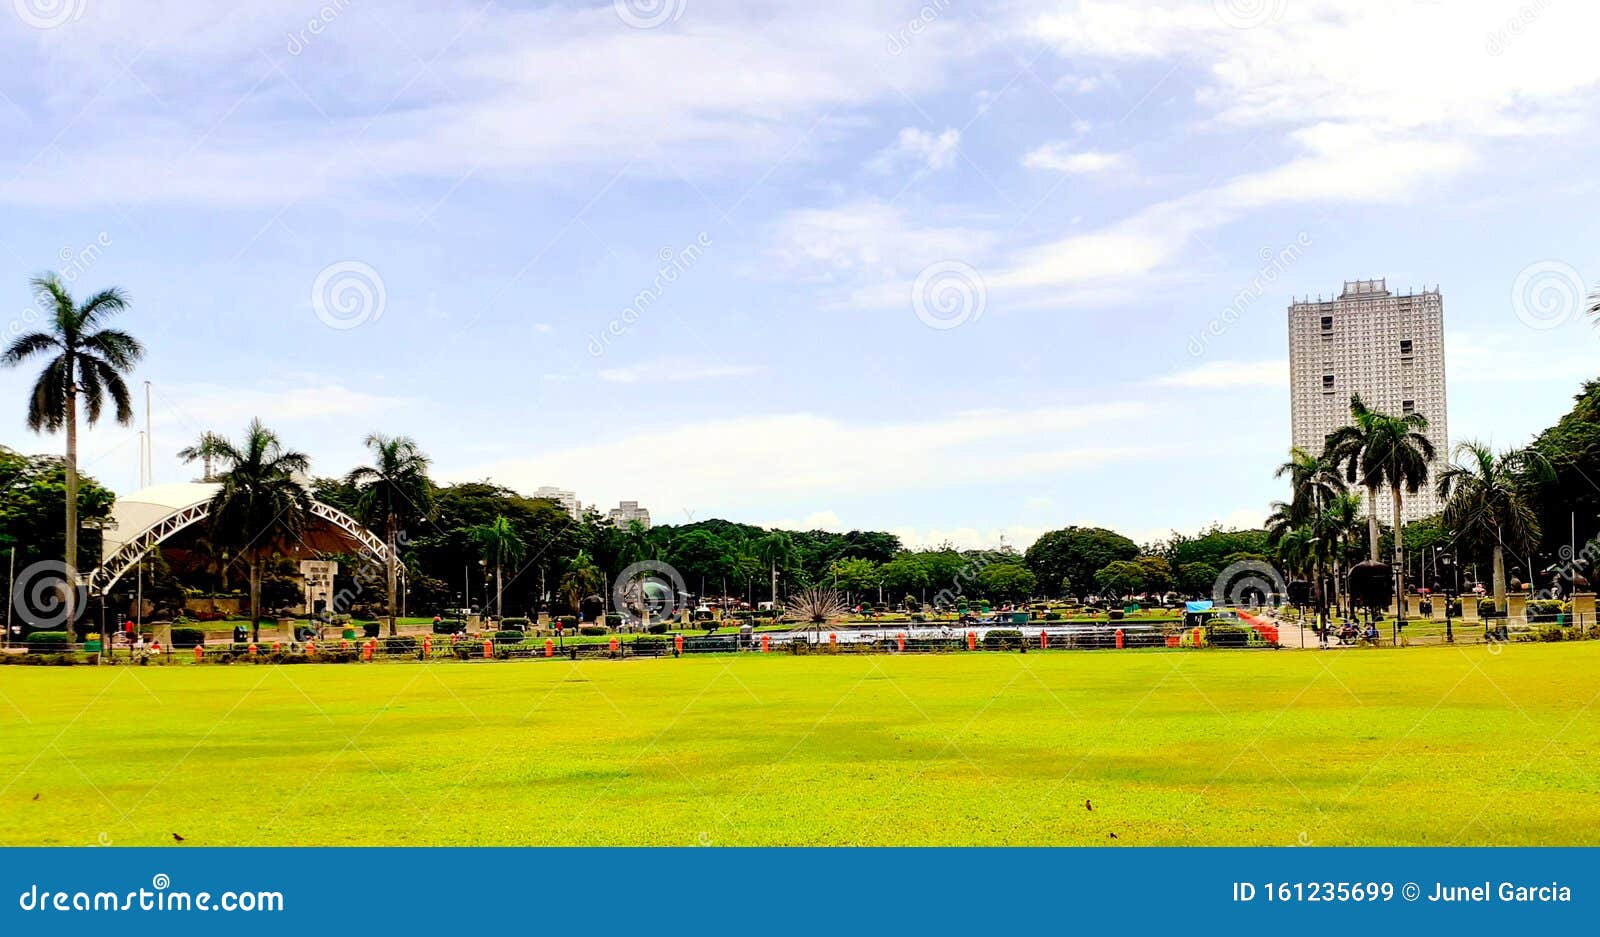 green plains of the historic luneta park capturing the famous photo bomber building